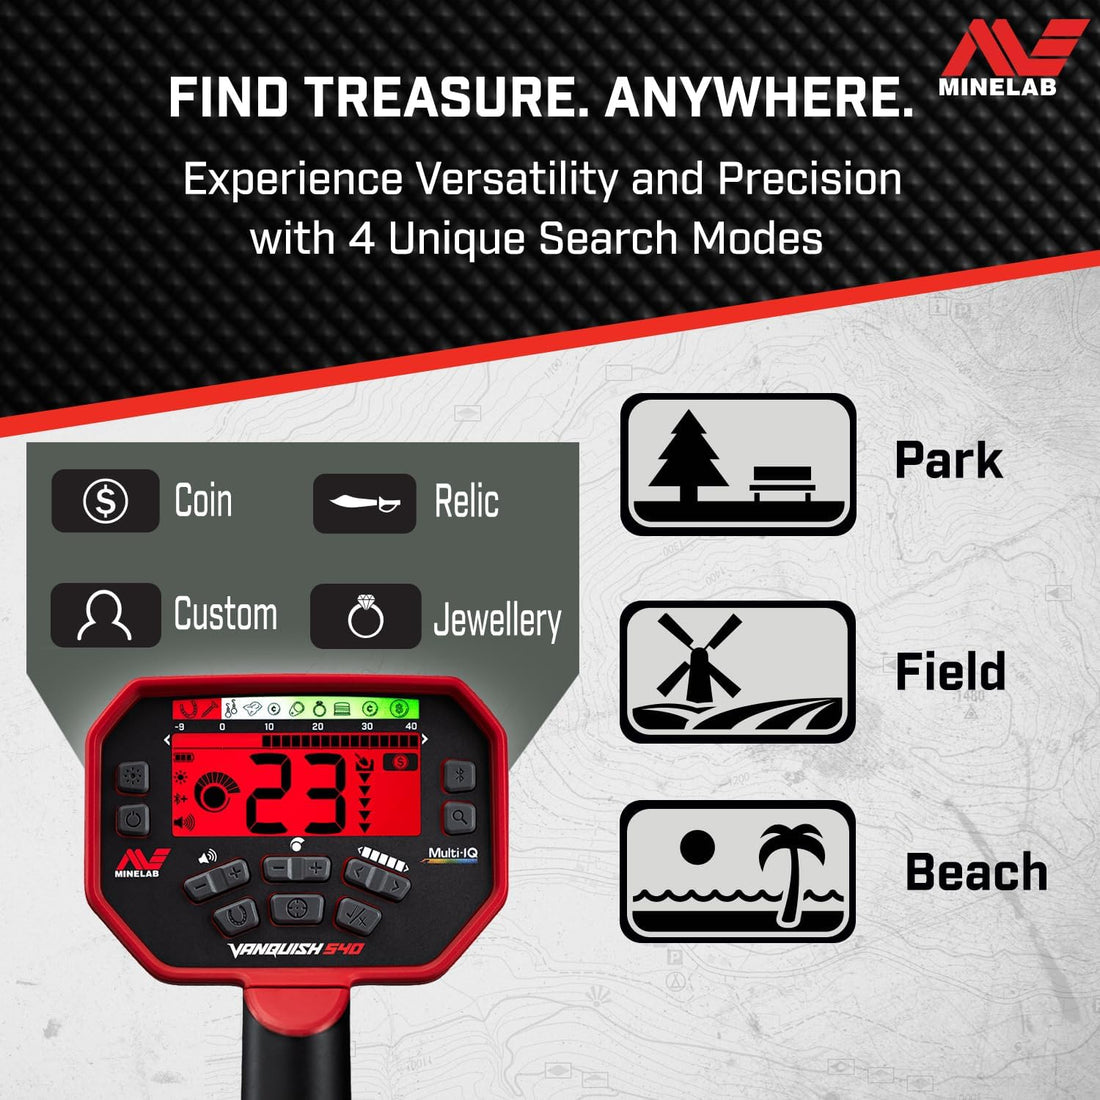 Minelab Vanquish 540 Multi-Frequency Pinpointing Metal Detector with Iron Bias & V12 12"x9" Double-D Waterproof Coil